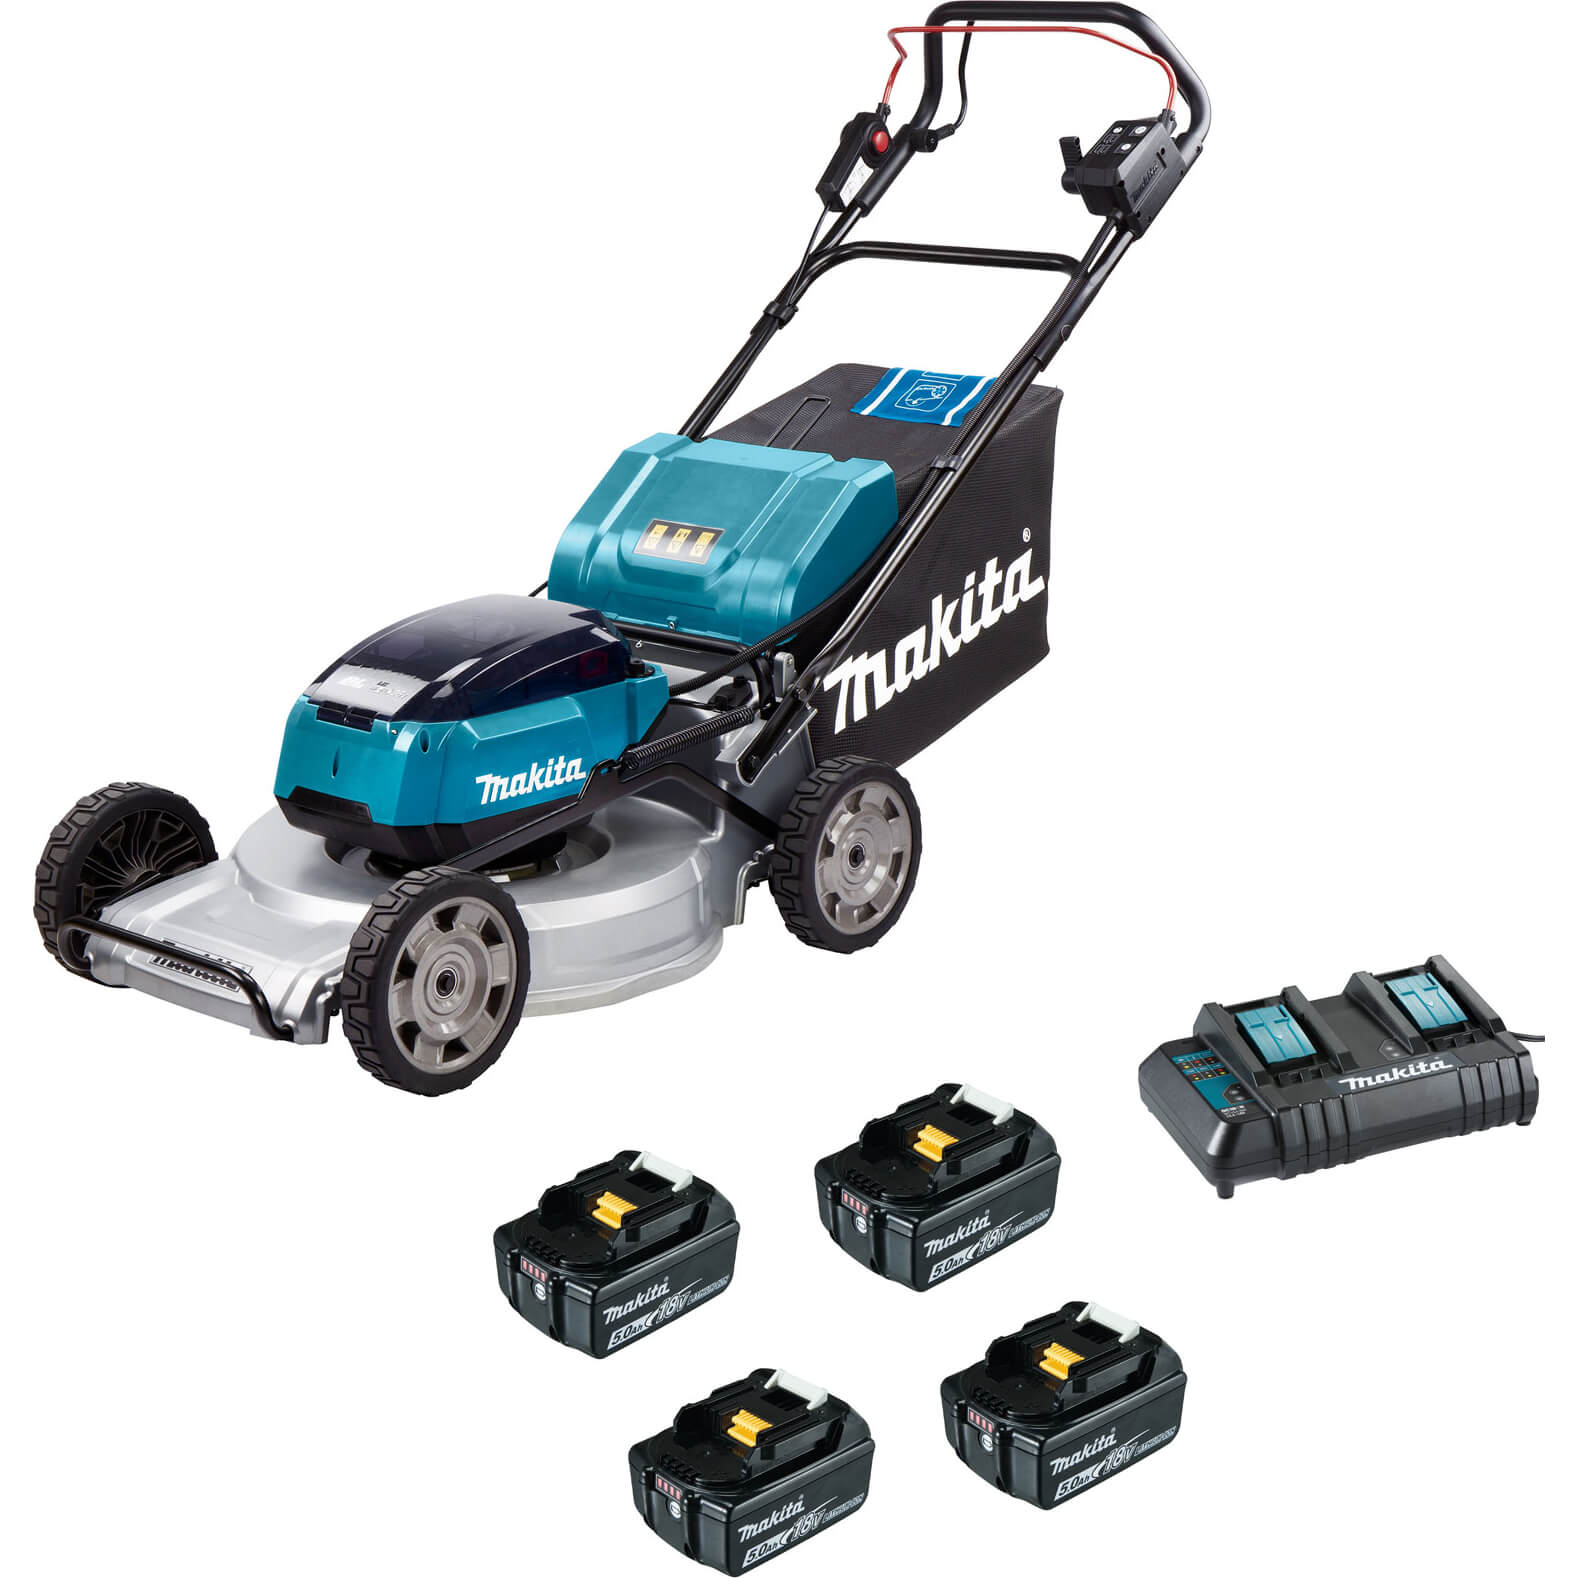 Image of Makita DLM533 Twin 18v LXT Cordless Brushless Lawnmower 530mm 4 x 5ah Li-ion Charger